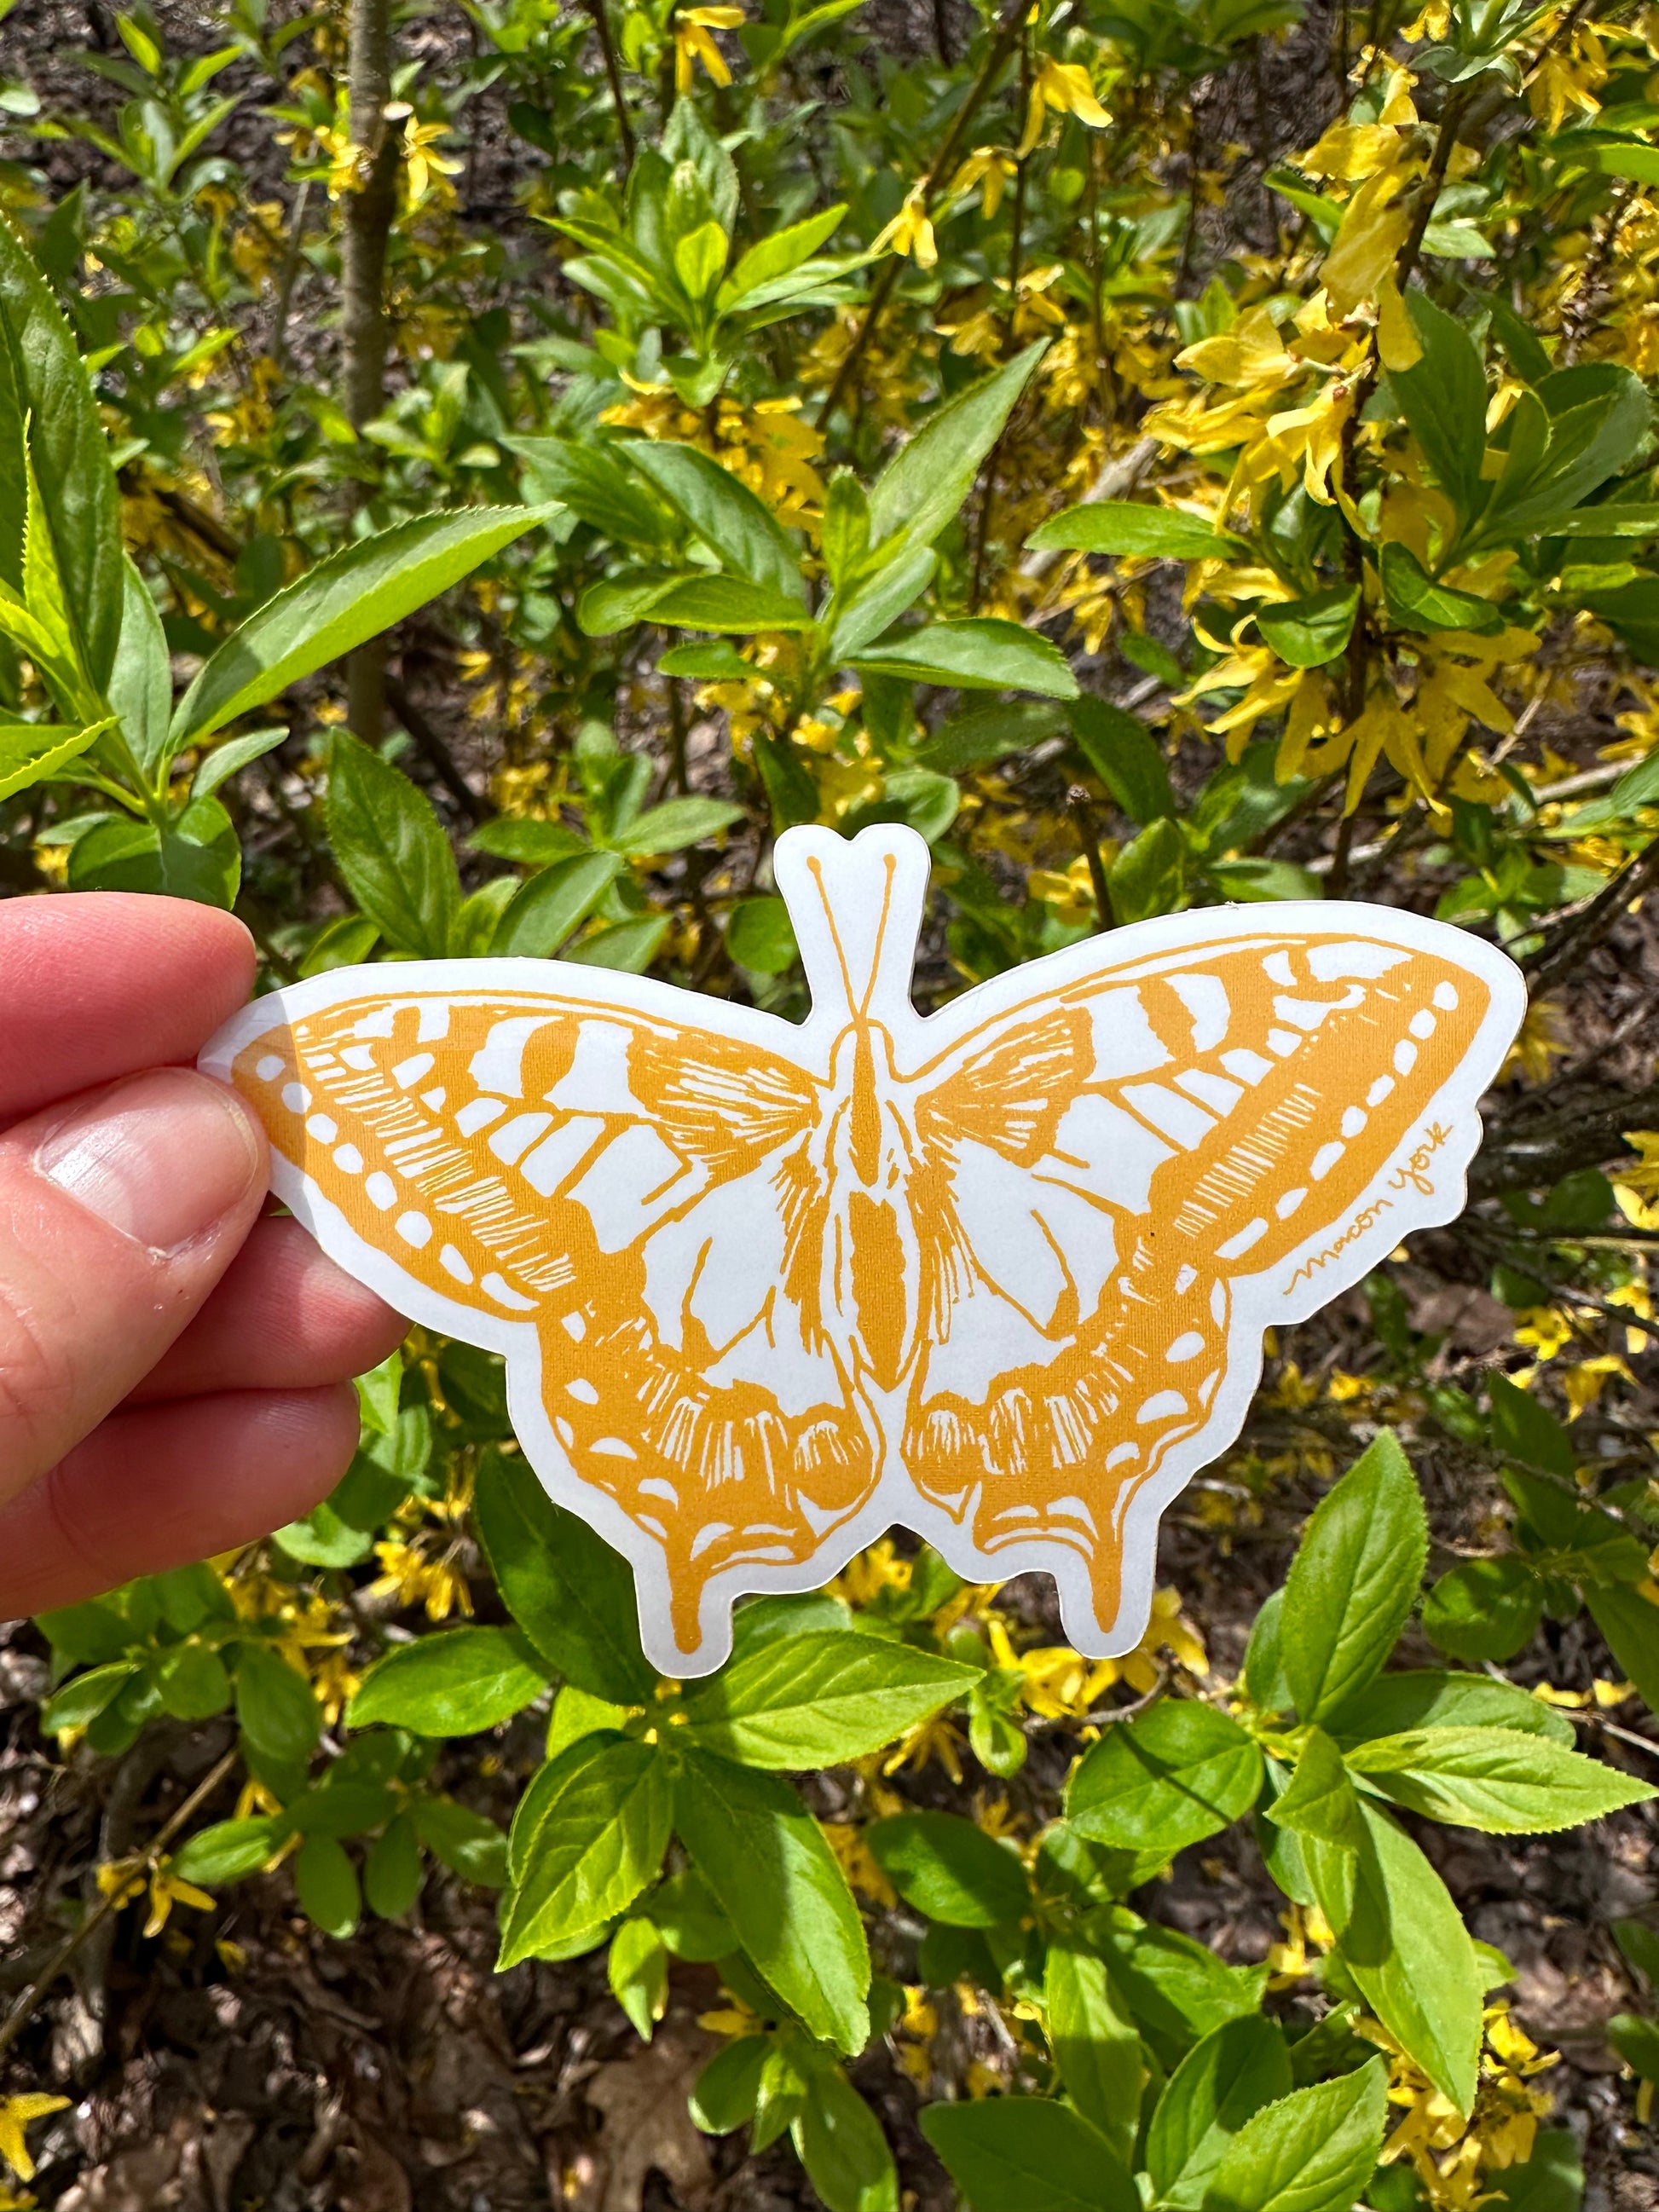 This Swallowtail sticker is a premium vinyl sticker that captures the beauty of the summertime Appalachian mountains. It features a hand-drawn image of the iconic swallowtail butterfly, perfect for those who appreciate the natural wonders of the region. Mustard gold ink. Sticker is shown in front of a blooming forsythia bush in spring.